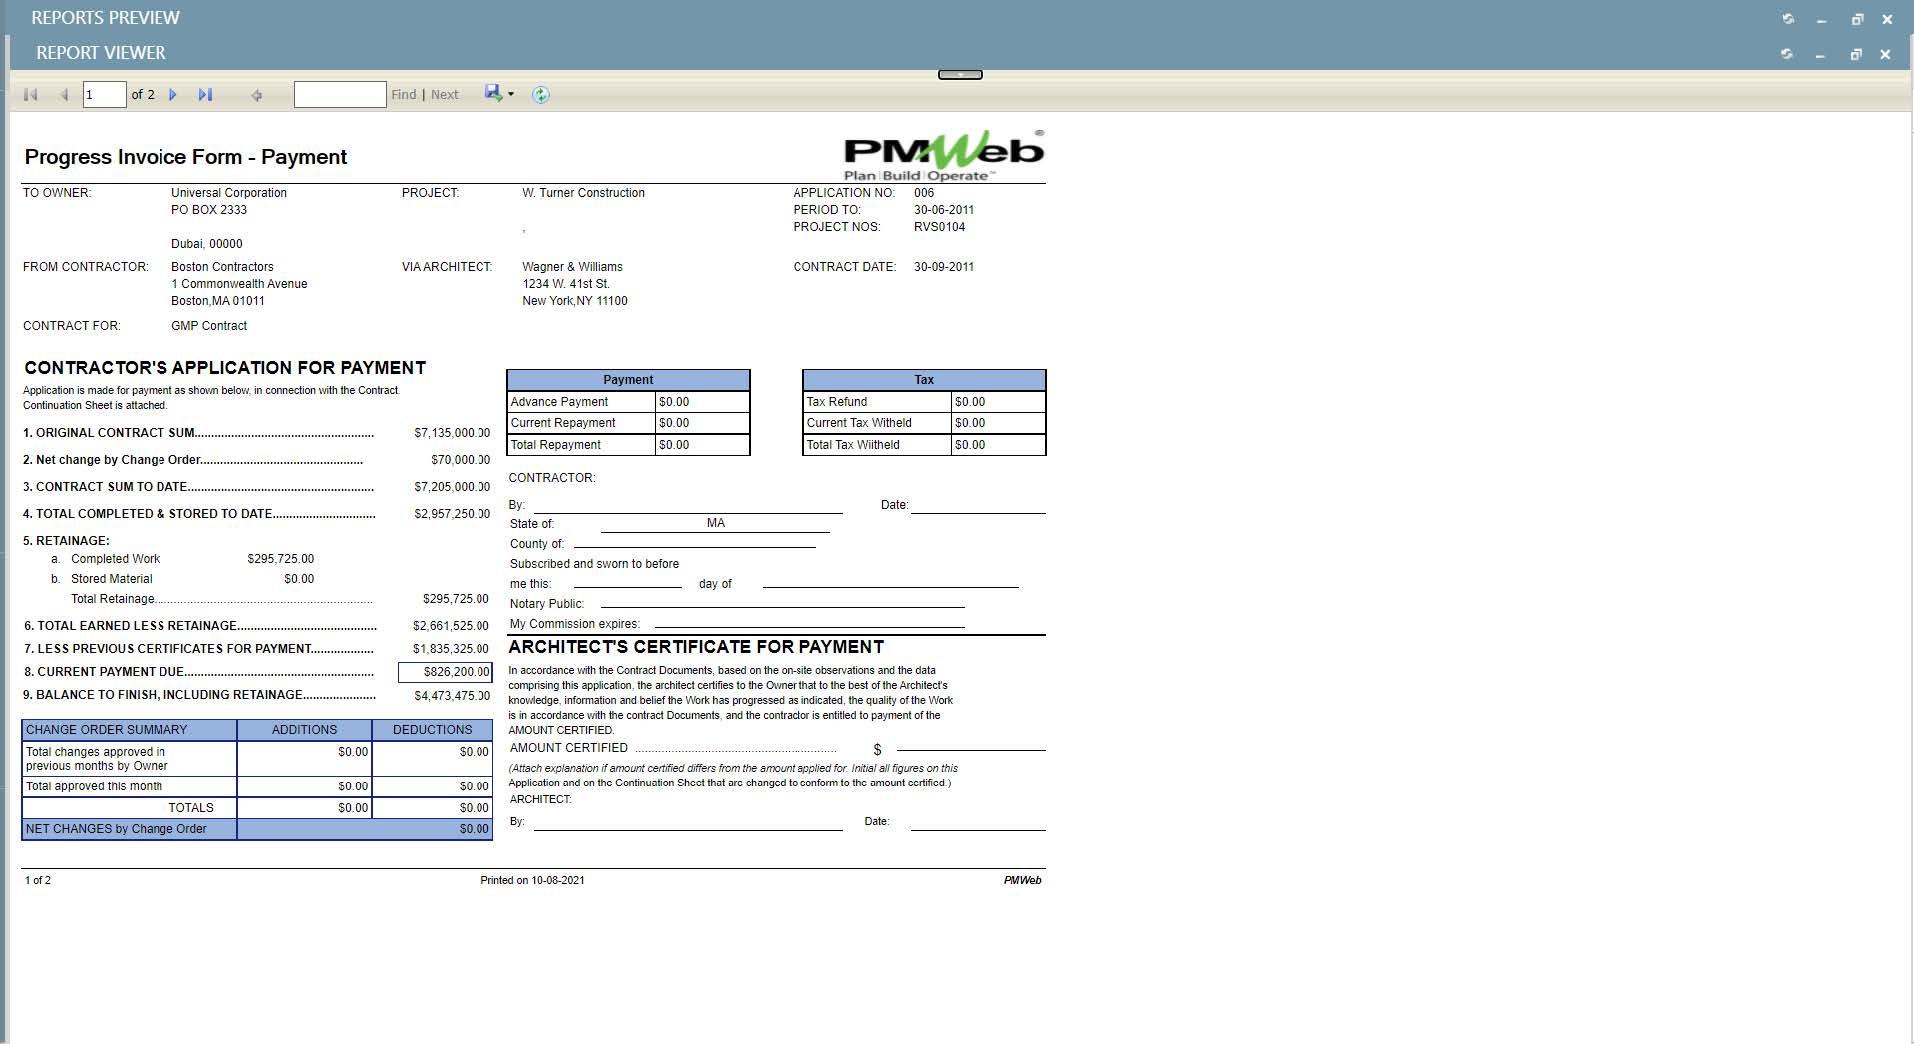 PMWeb 7 Reports Preview Report Viewer 
Progress Invoice Form Payment 